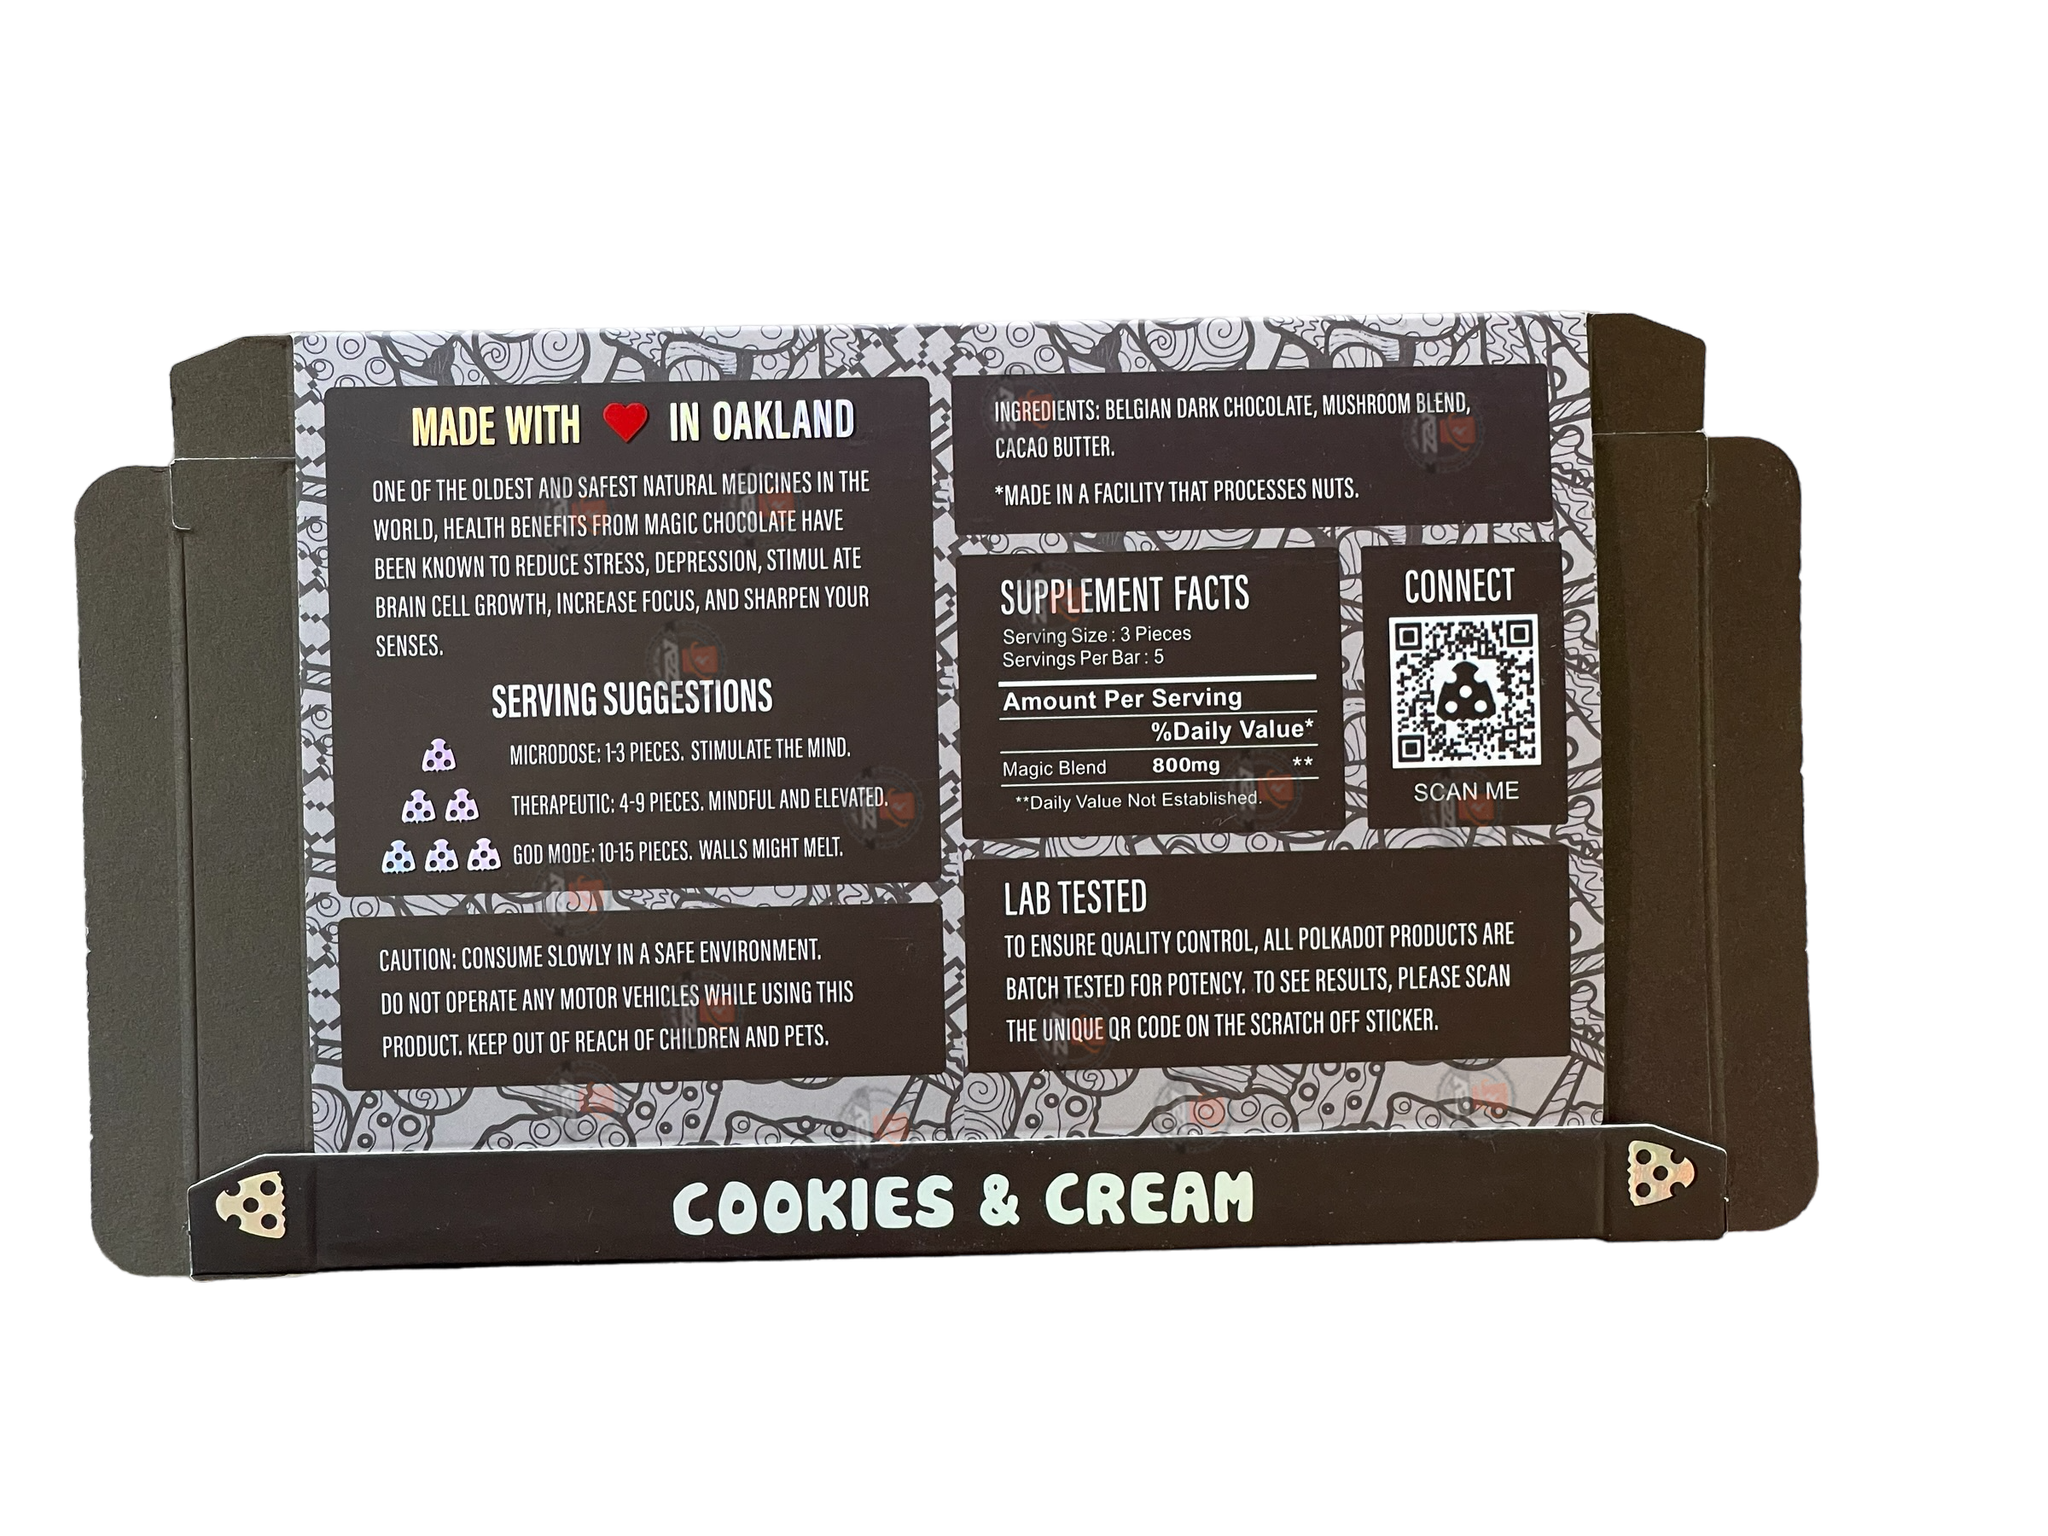 Polkadot Packaging Cookies & Cream (Master Box Included) Packaging Only